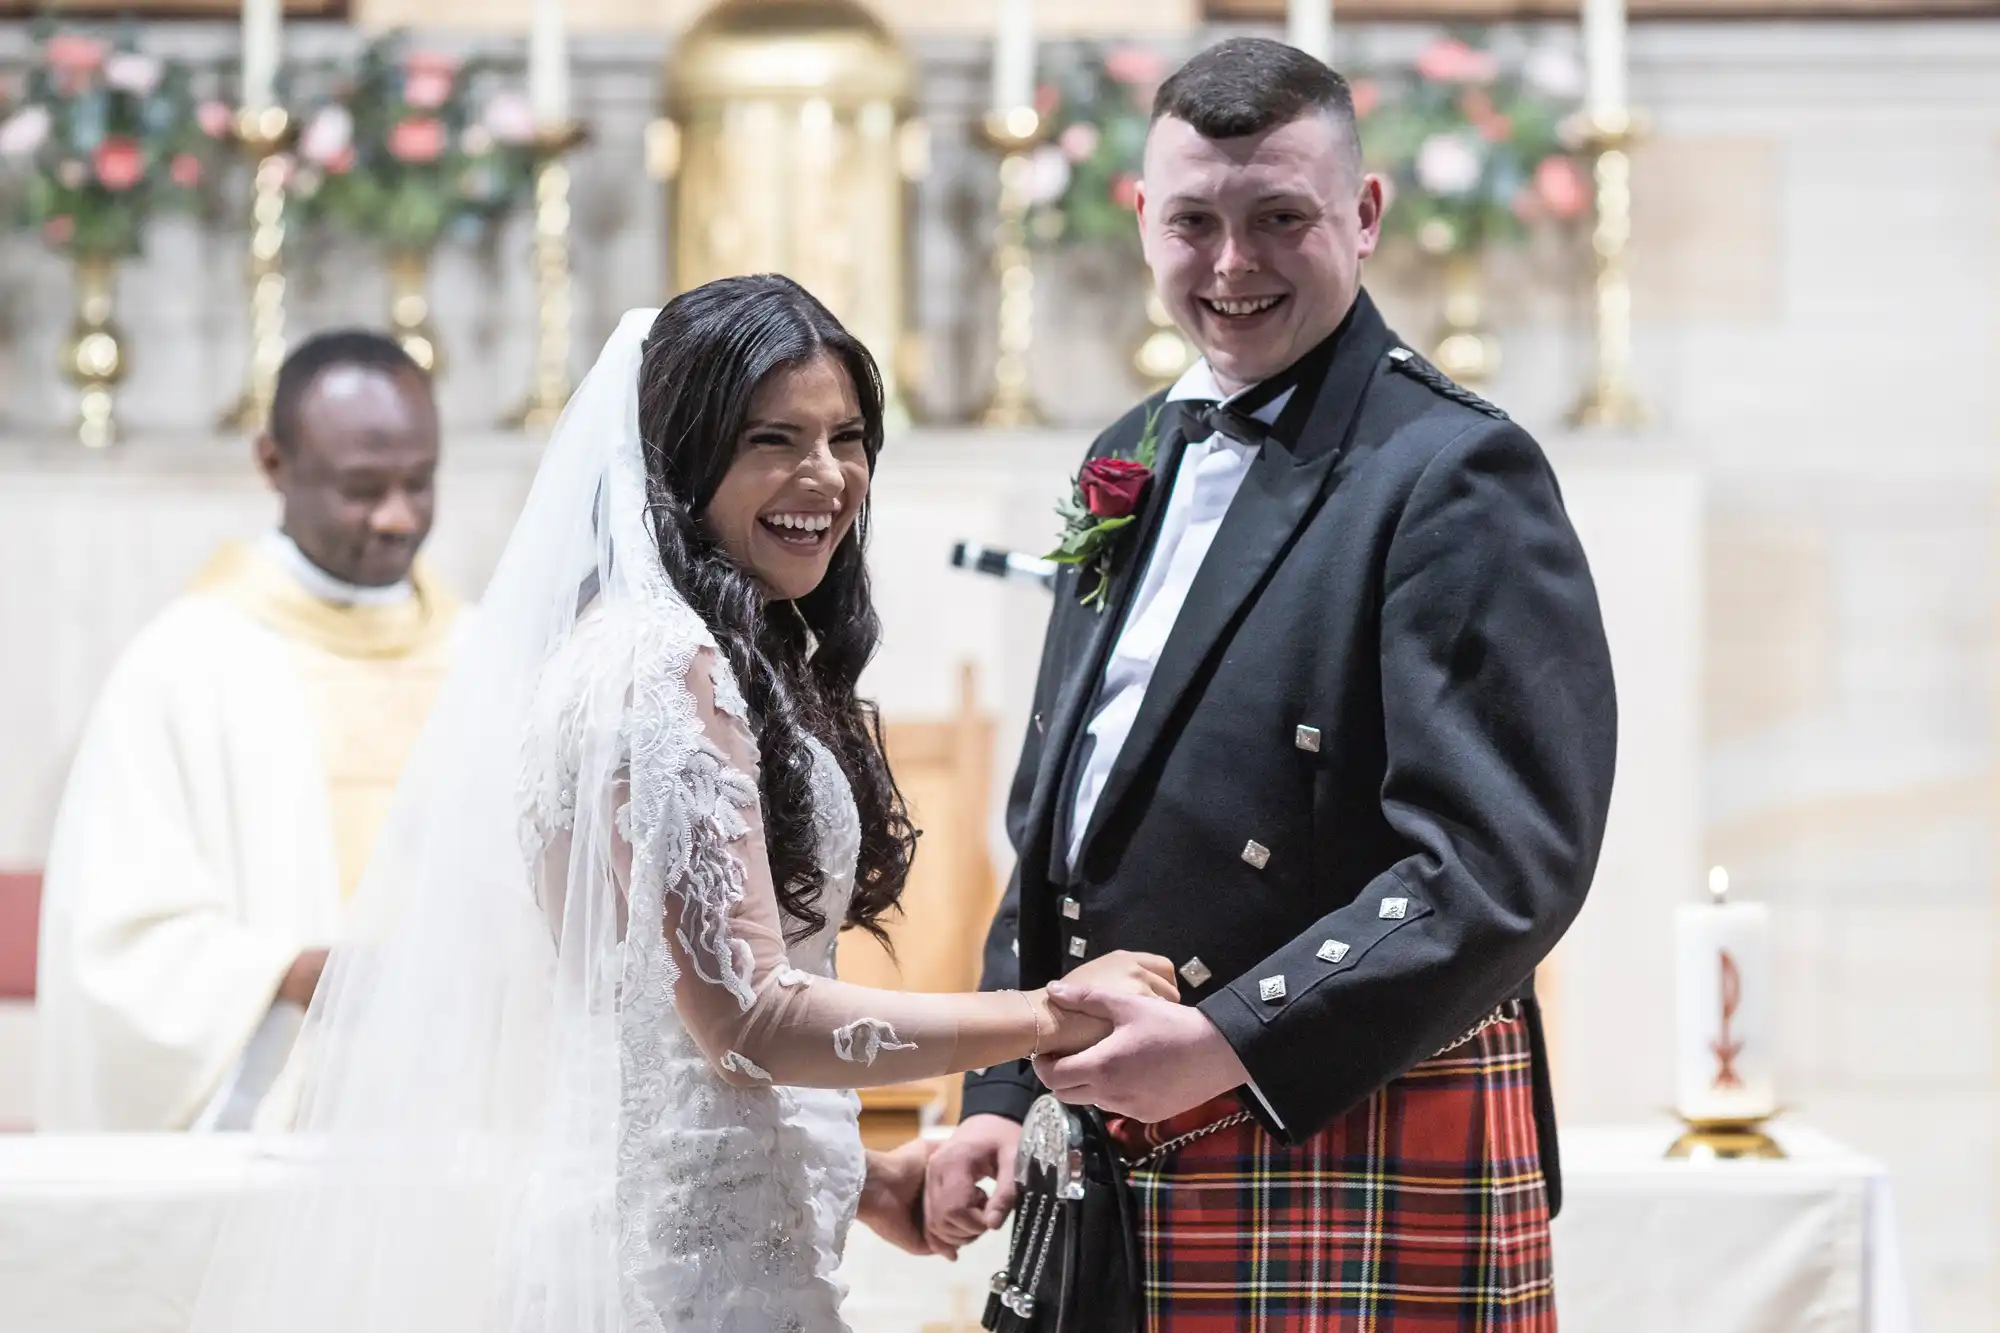 A joyful bride and groom exchange rings in a church wedding ceremony, with the groom wearing a kilt and the bride in a white lace dress. A priest observes in the background.